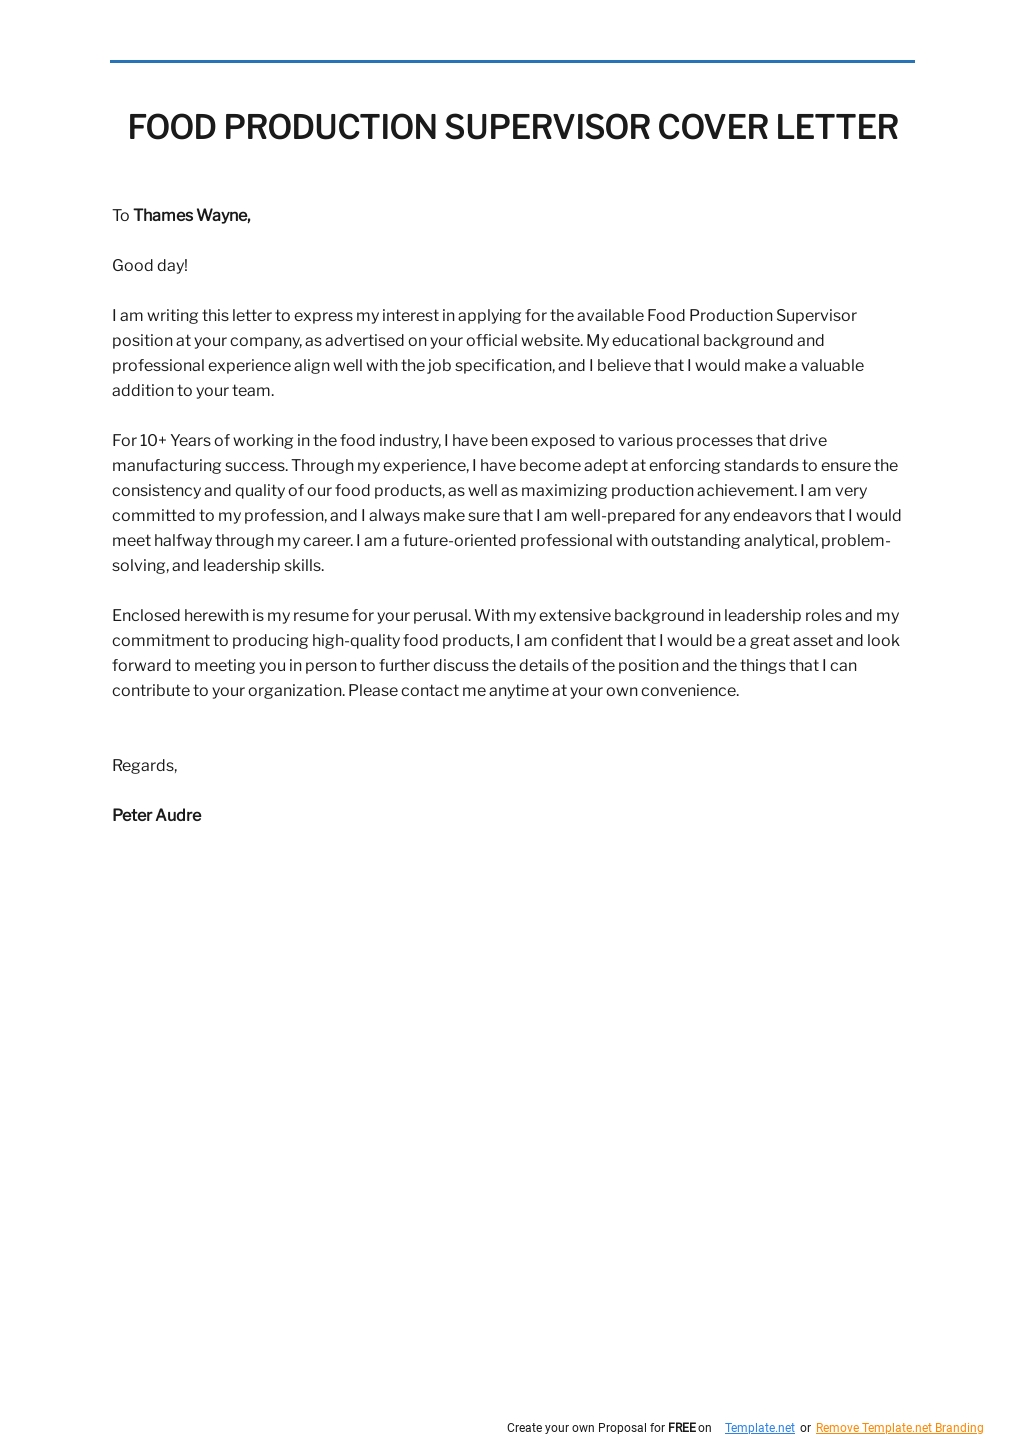 Food Production Supervisor Cover Letter Template.jpe